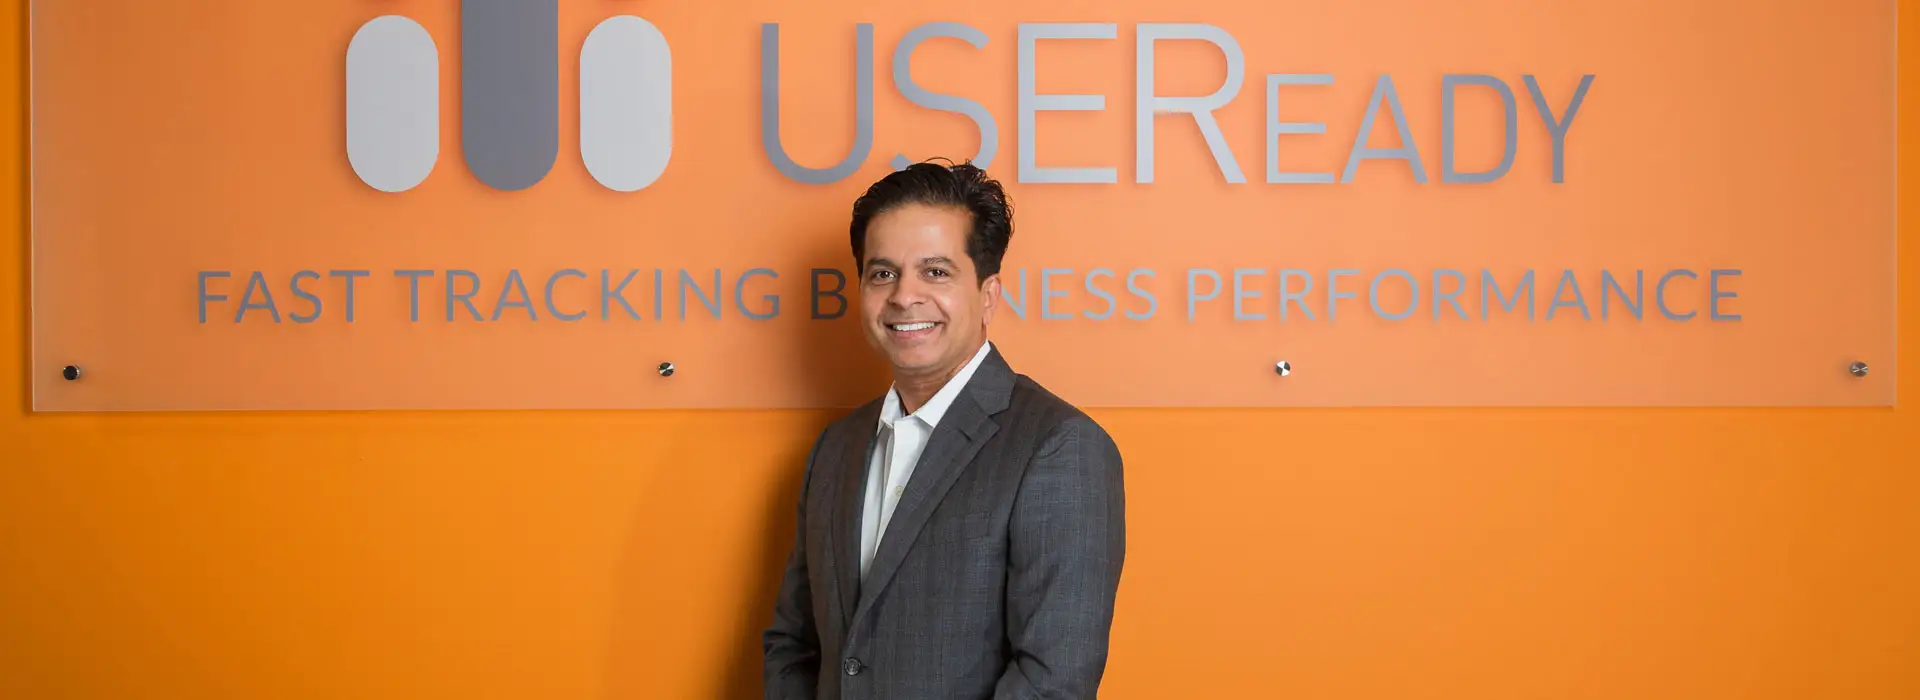 USEReady: Empowering Businesses with Data in Mississauga, Canada